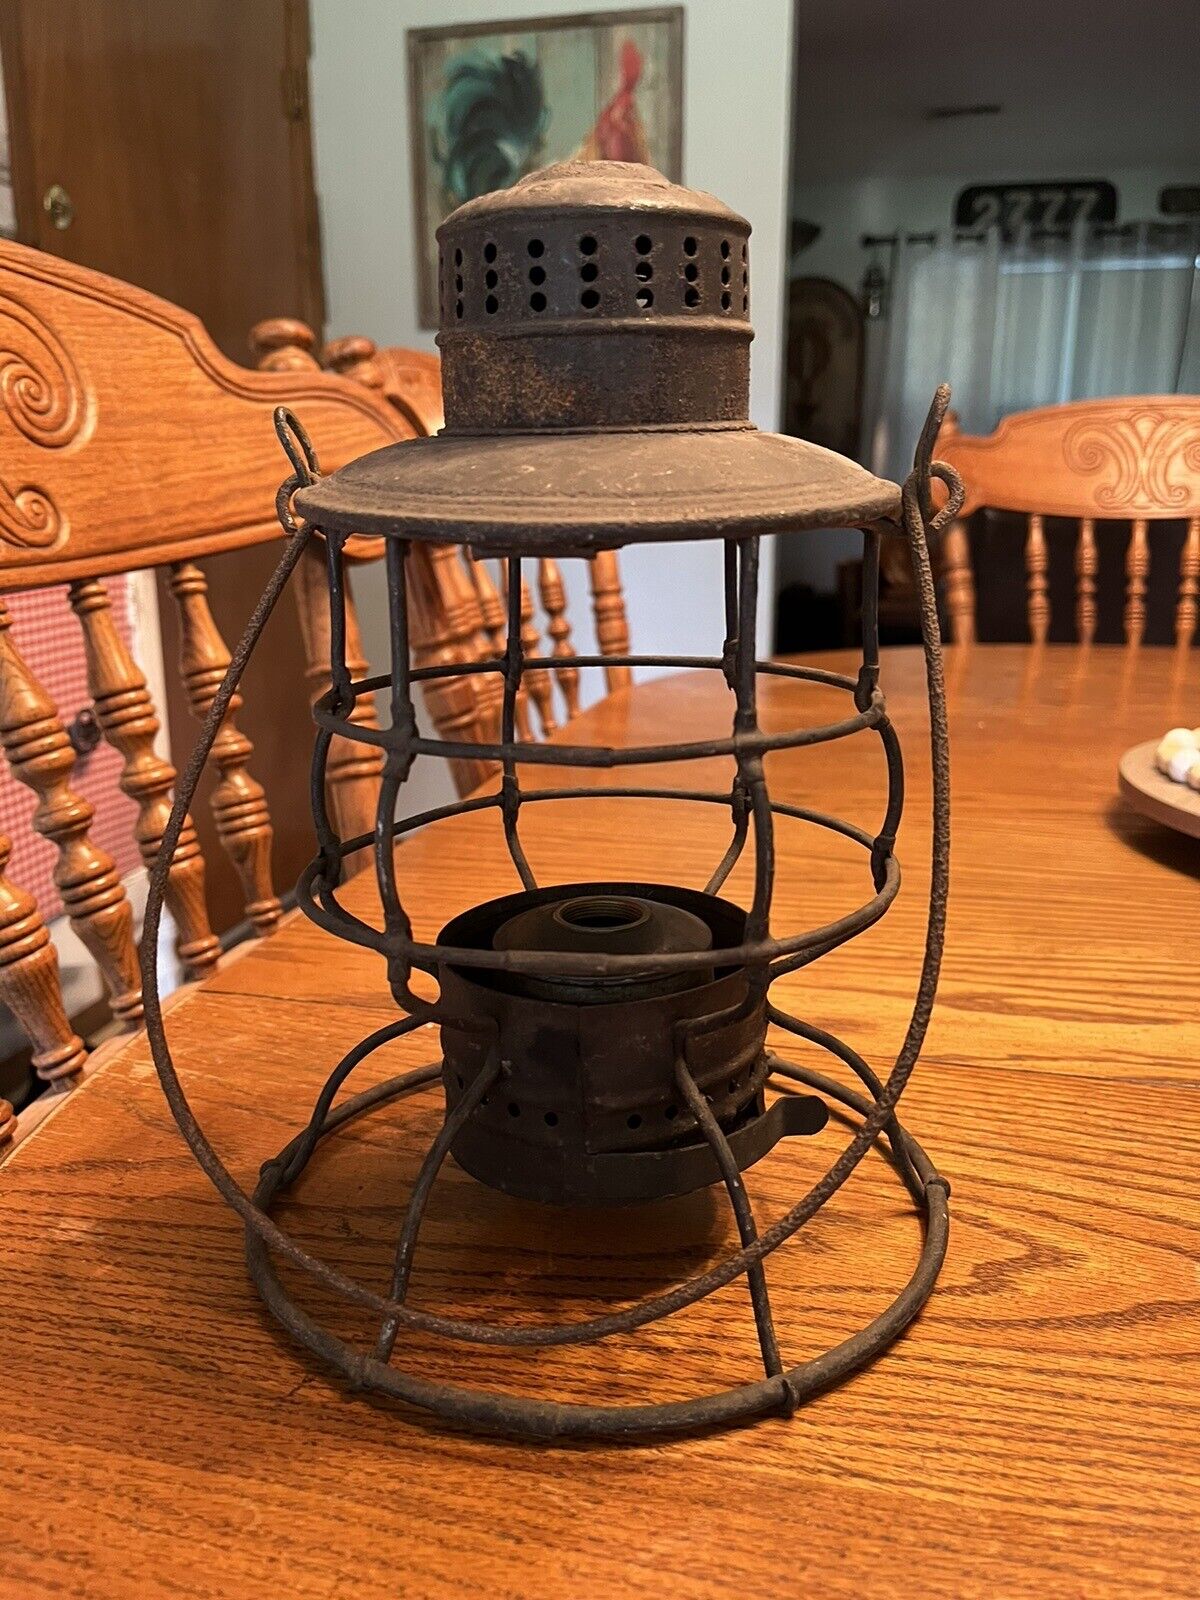 Antique Railroad Style Lantern PITTSBURGH GAGE & SUPPLY CO PITTSBURGH pa